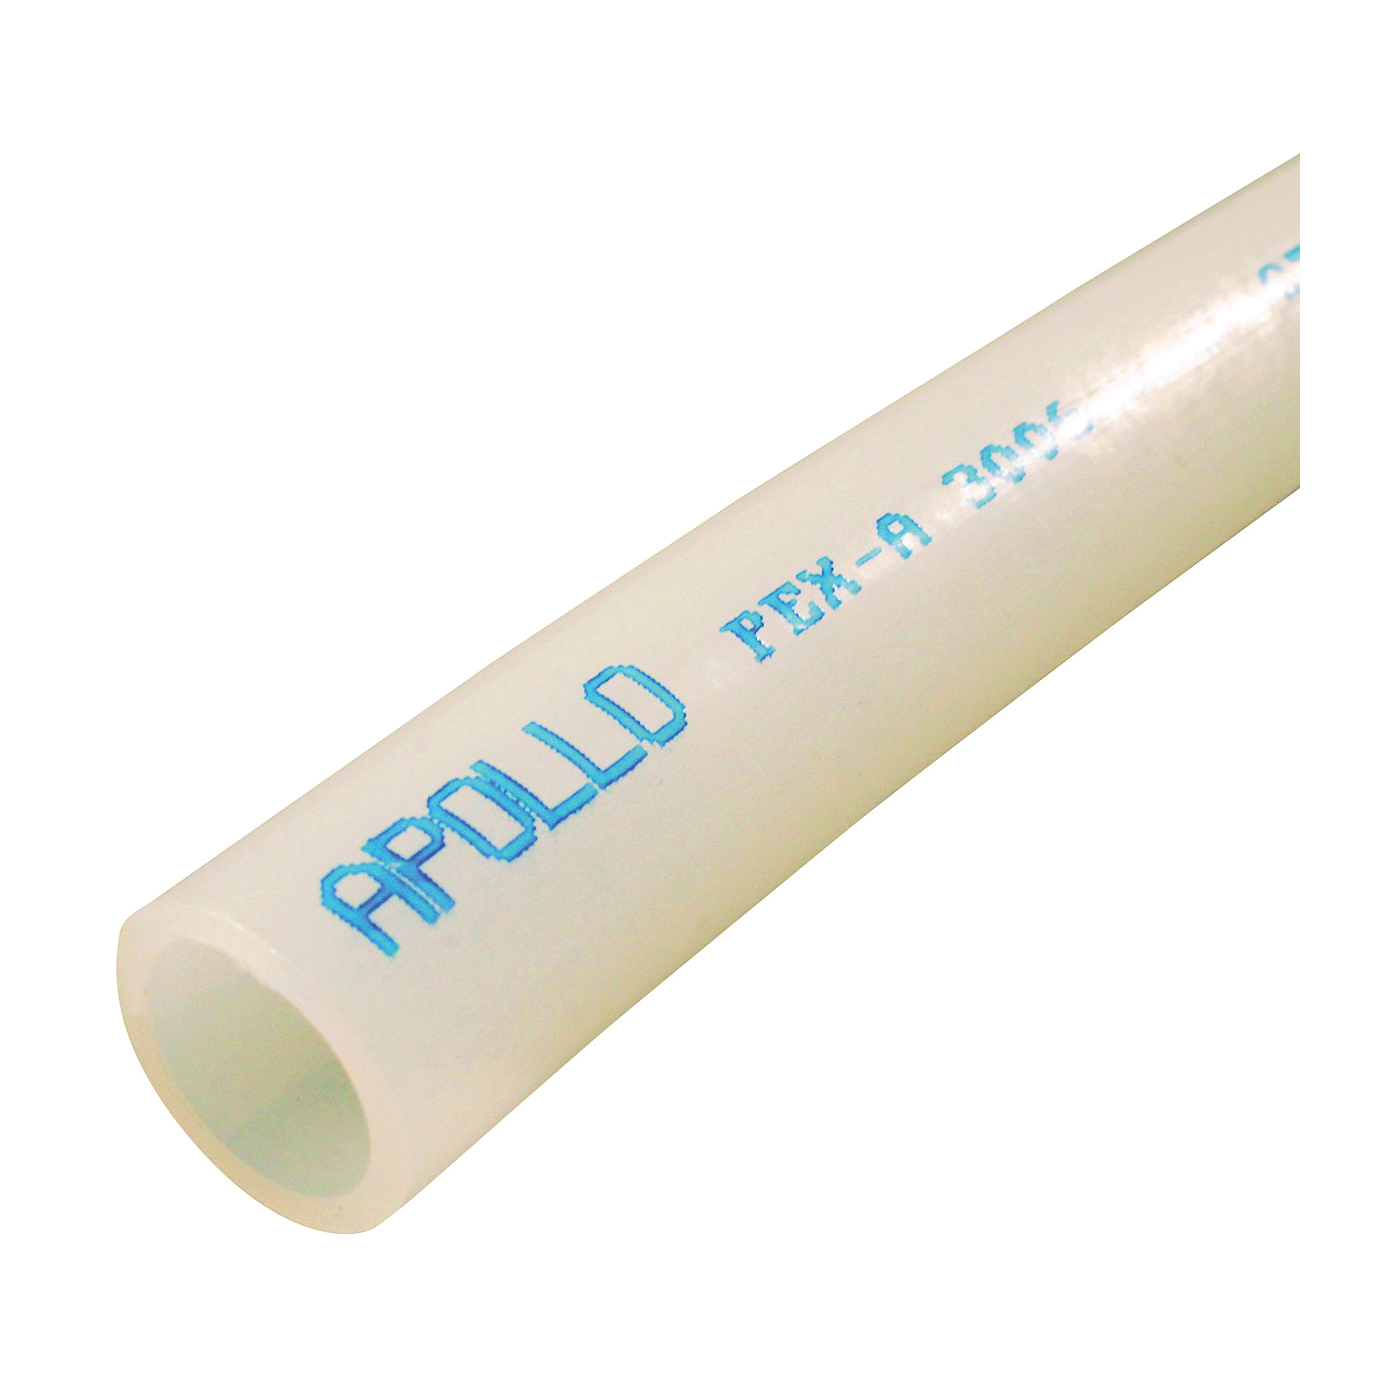 EPPB10034 PEX-A Pipe Tubing, 3/4 in, Opaque, 100 ft L